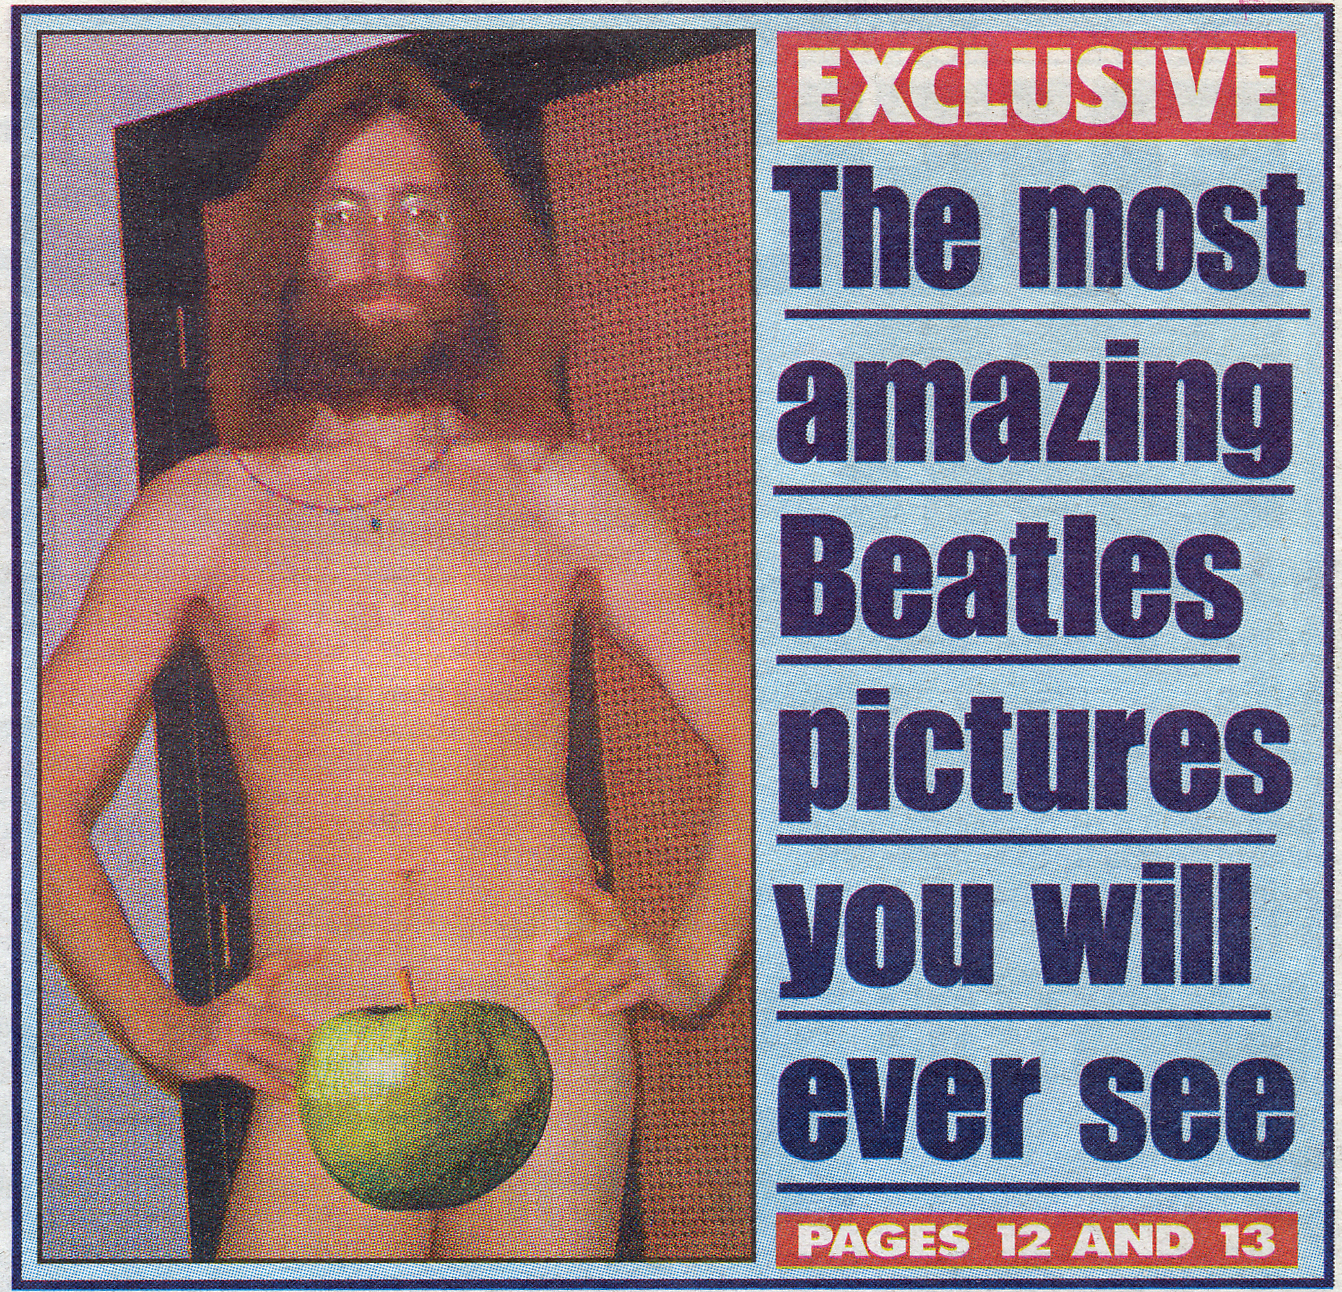 The Beatles Nude